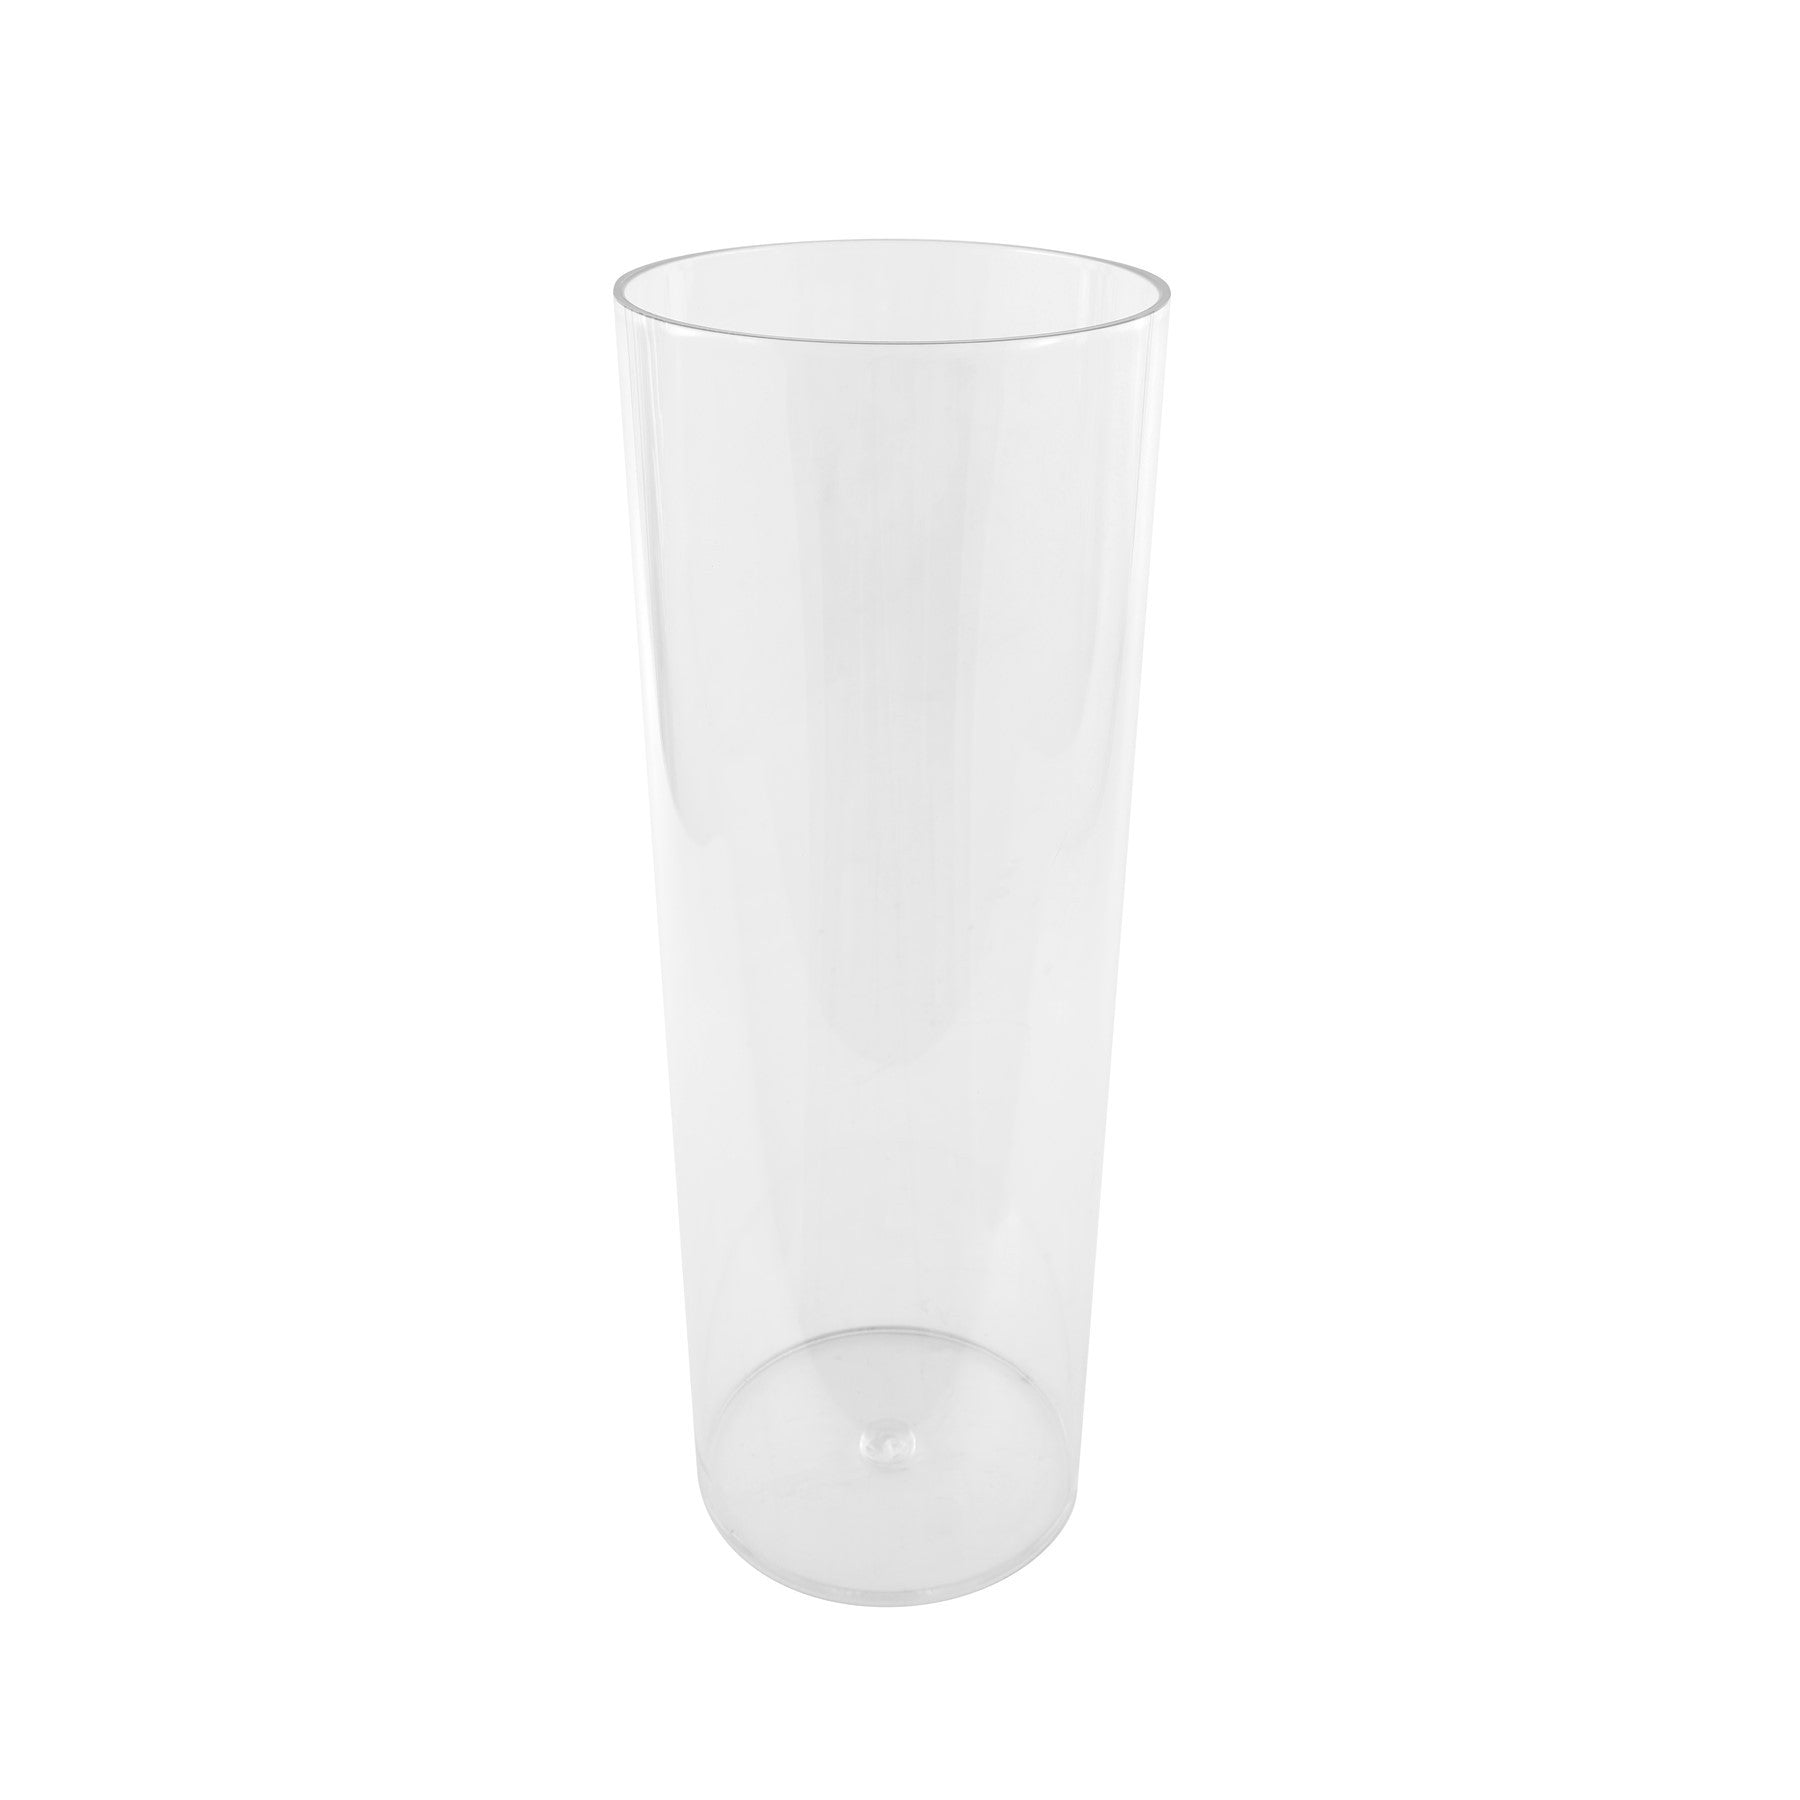 View Clear Acrylic Cylinder Dia18 x H50cm information